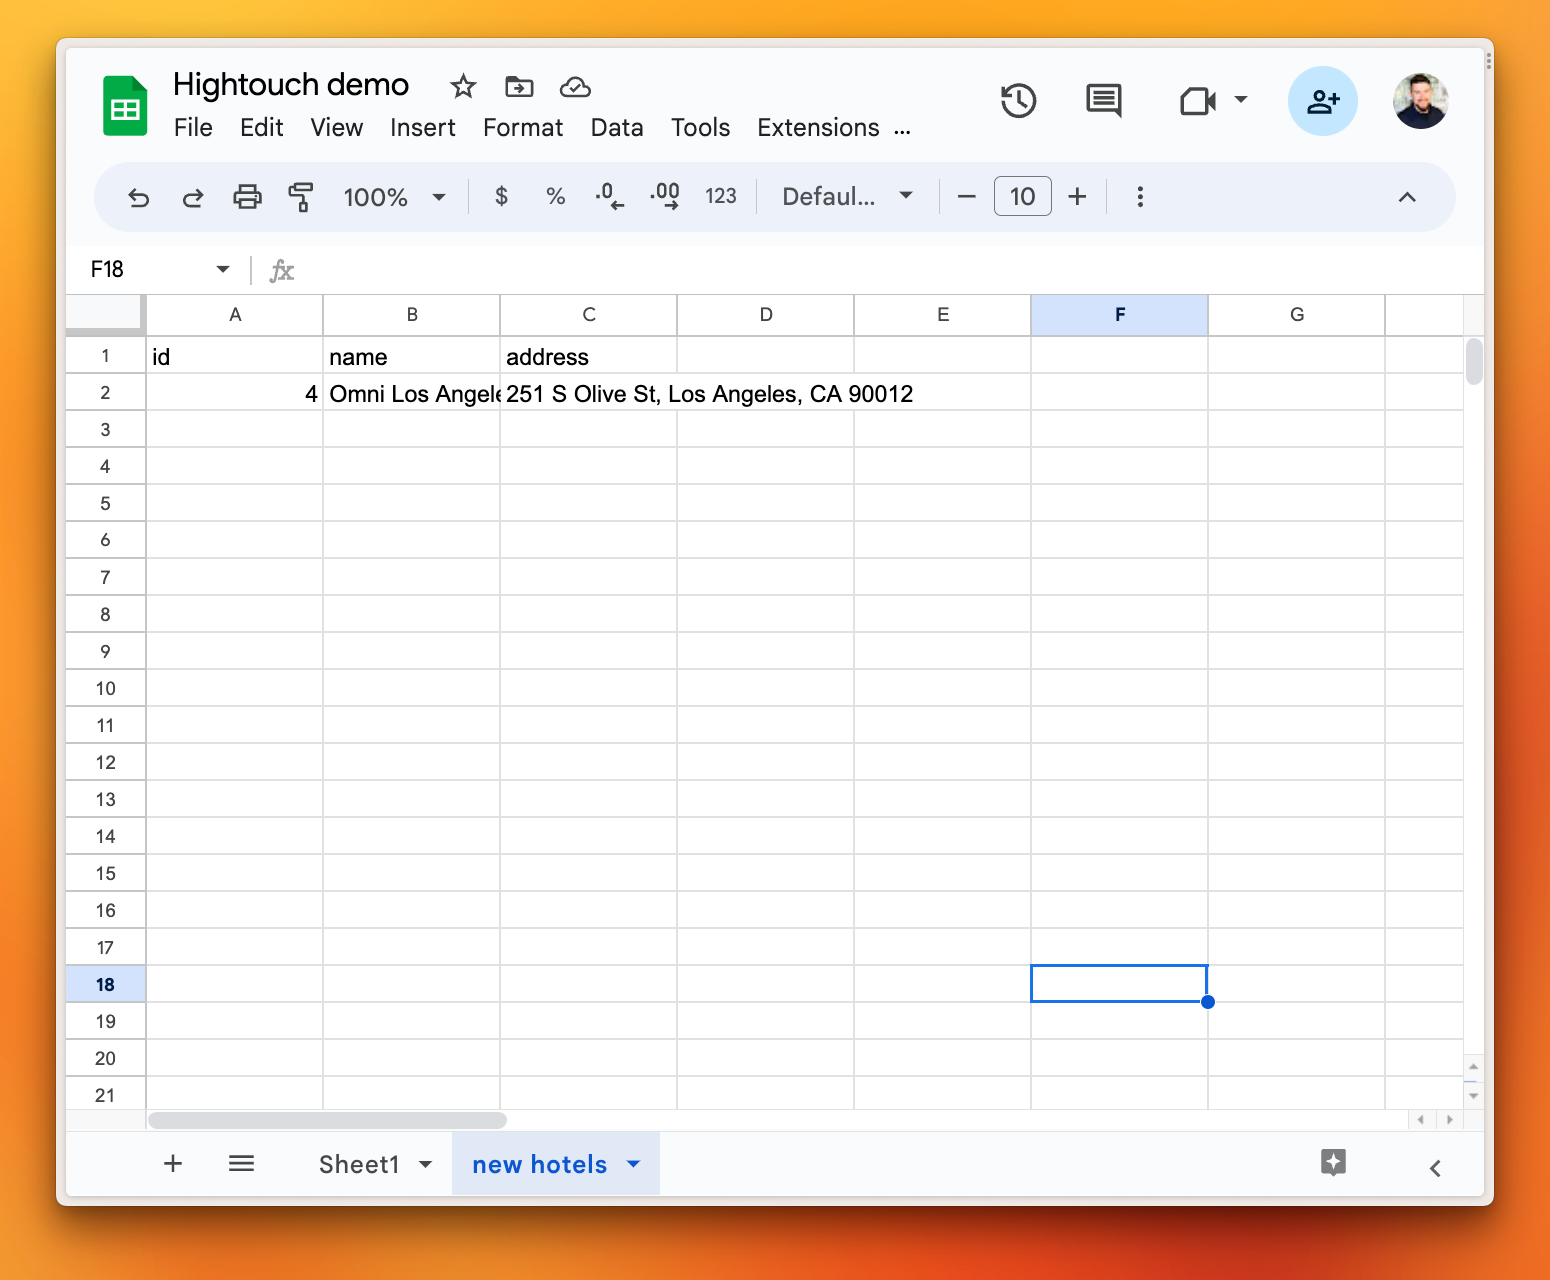 The new hotels sheet in Google Sheets